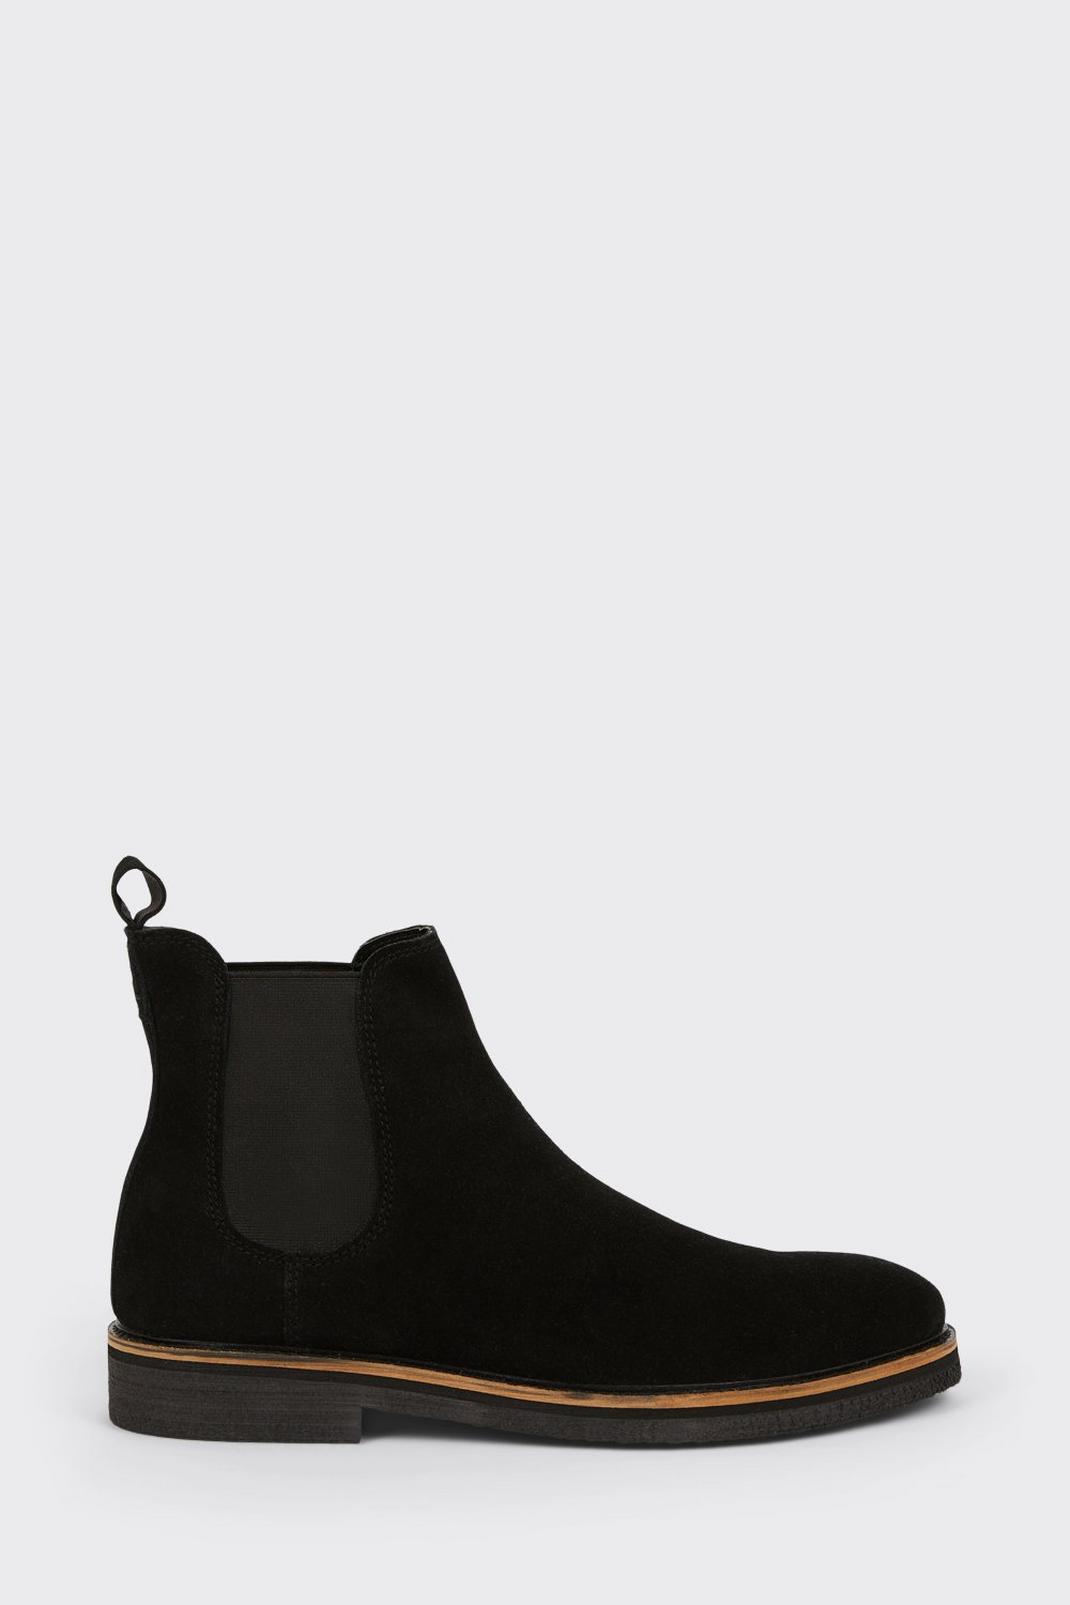 Suede Black Chelsea Boots image number 1